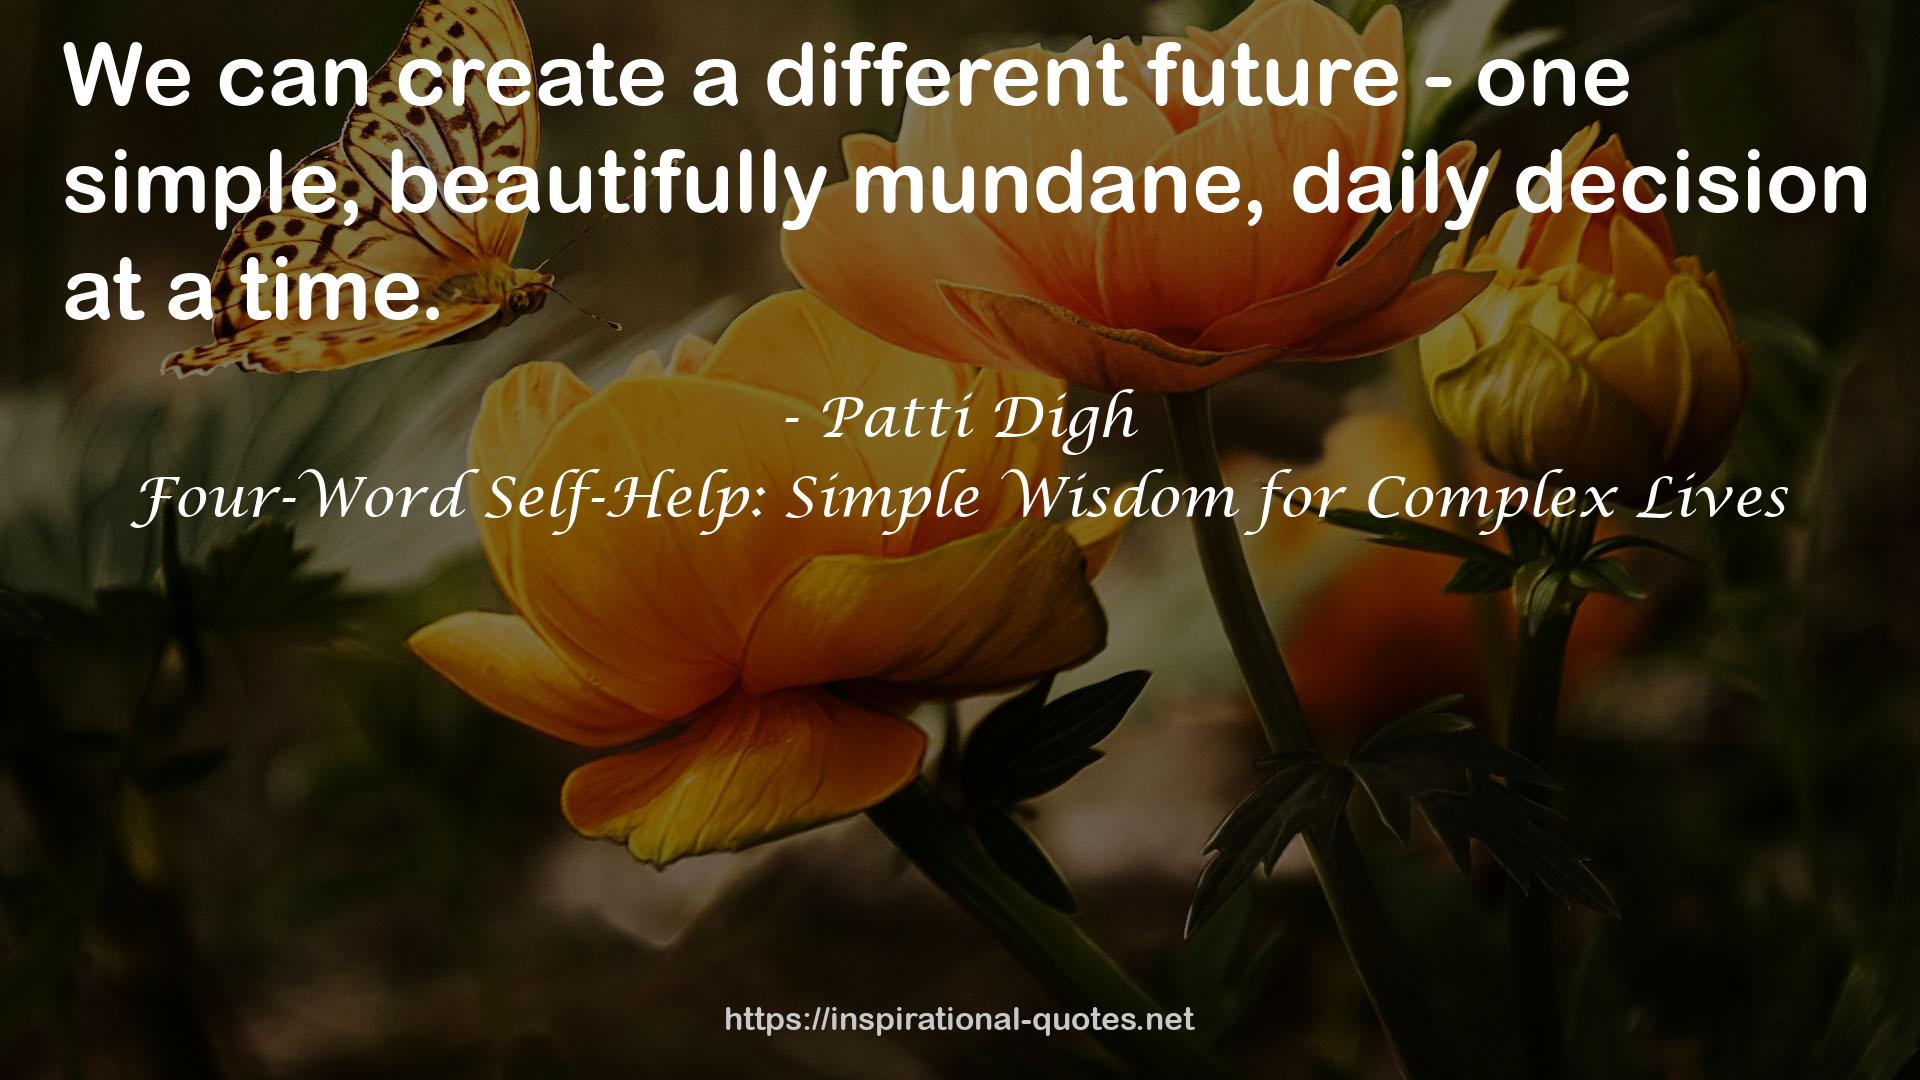 Four-Word Self-Help: Simple Wisdom for Complex Lives QUOTES